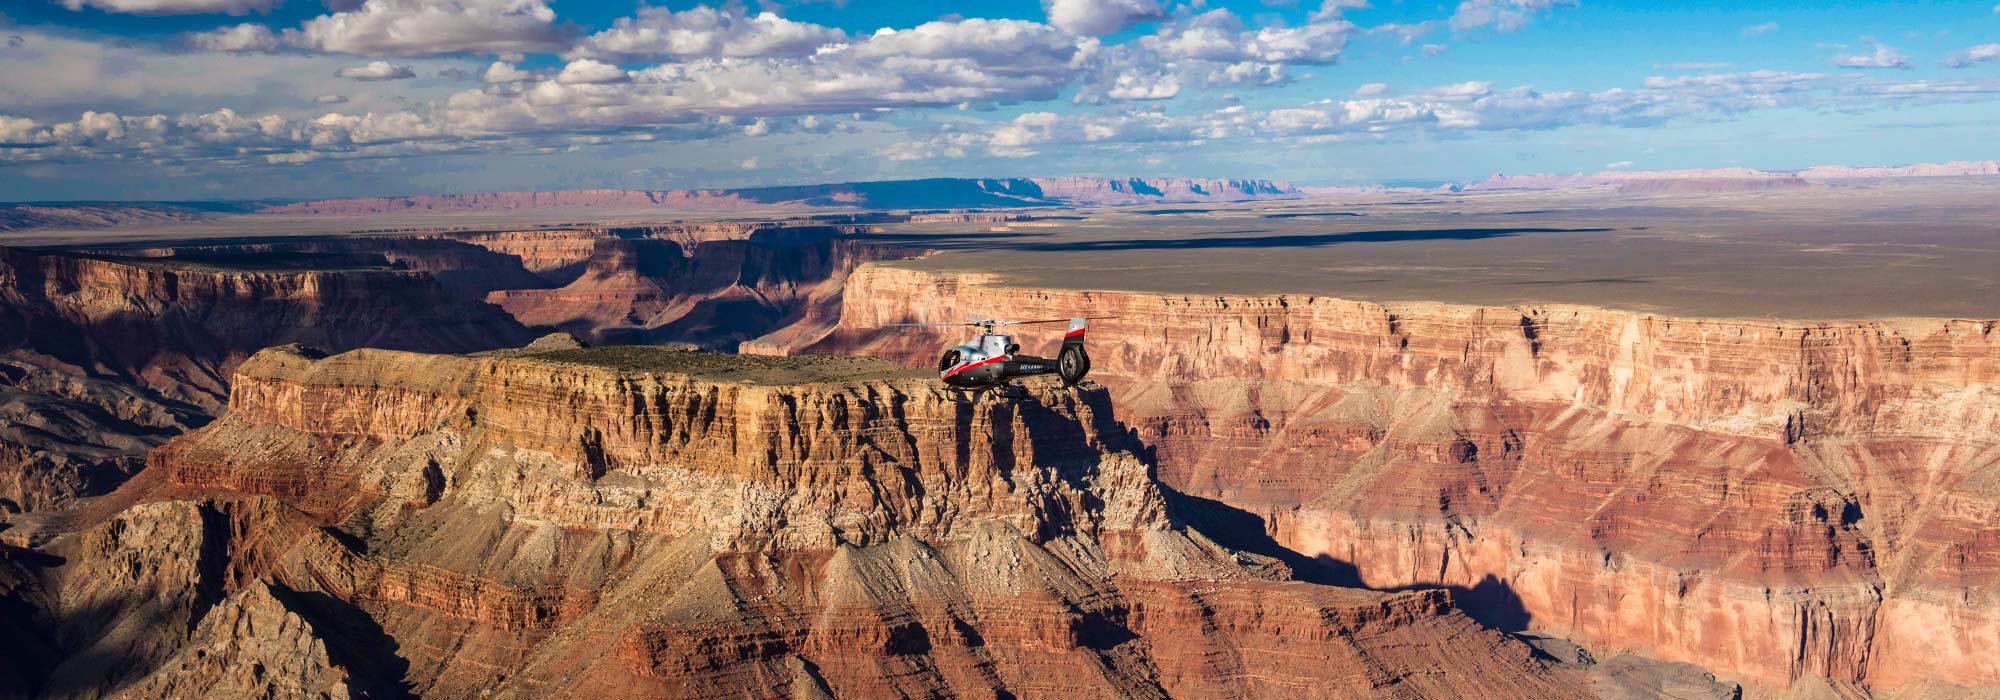 Explore Grand Canyon National Park South Rim with a helicopter and airplane tour